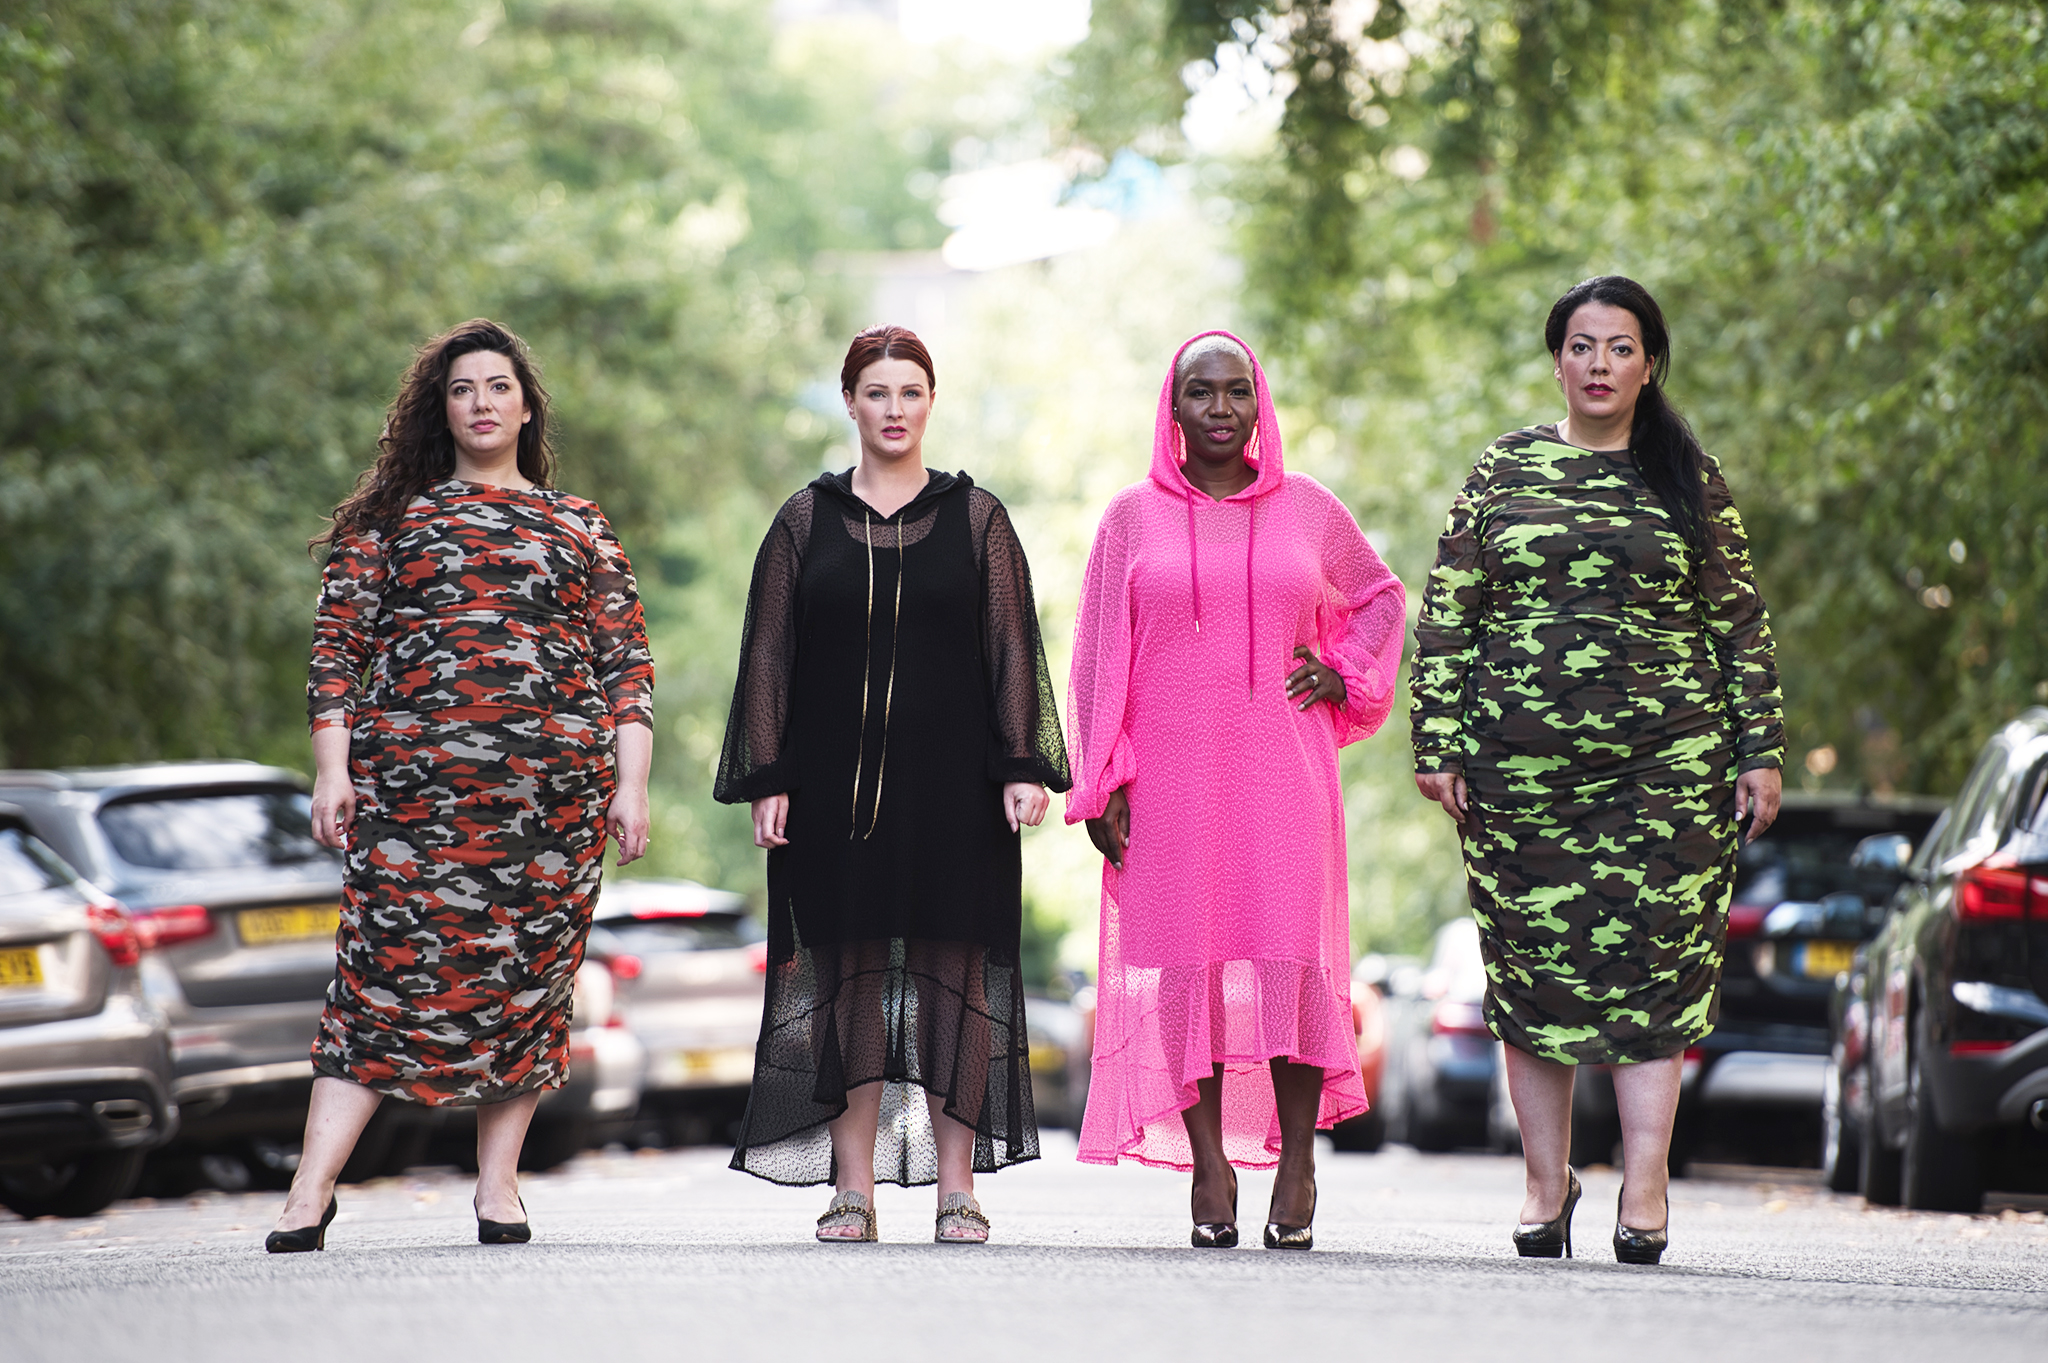 Colorful Plus Size Dresses for Spring and Summer by Sylvia Piechulla Fashion  Design - Fashion Trendsetter